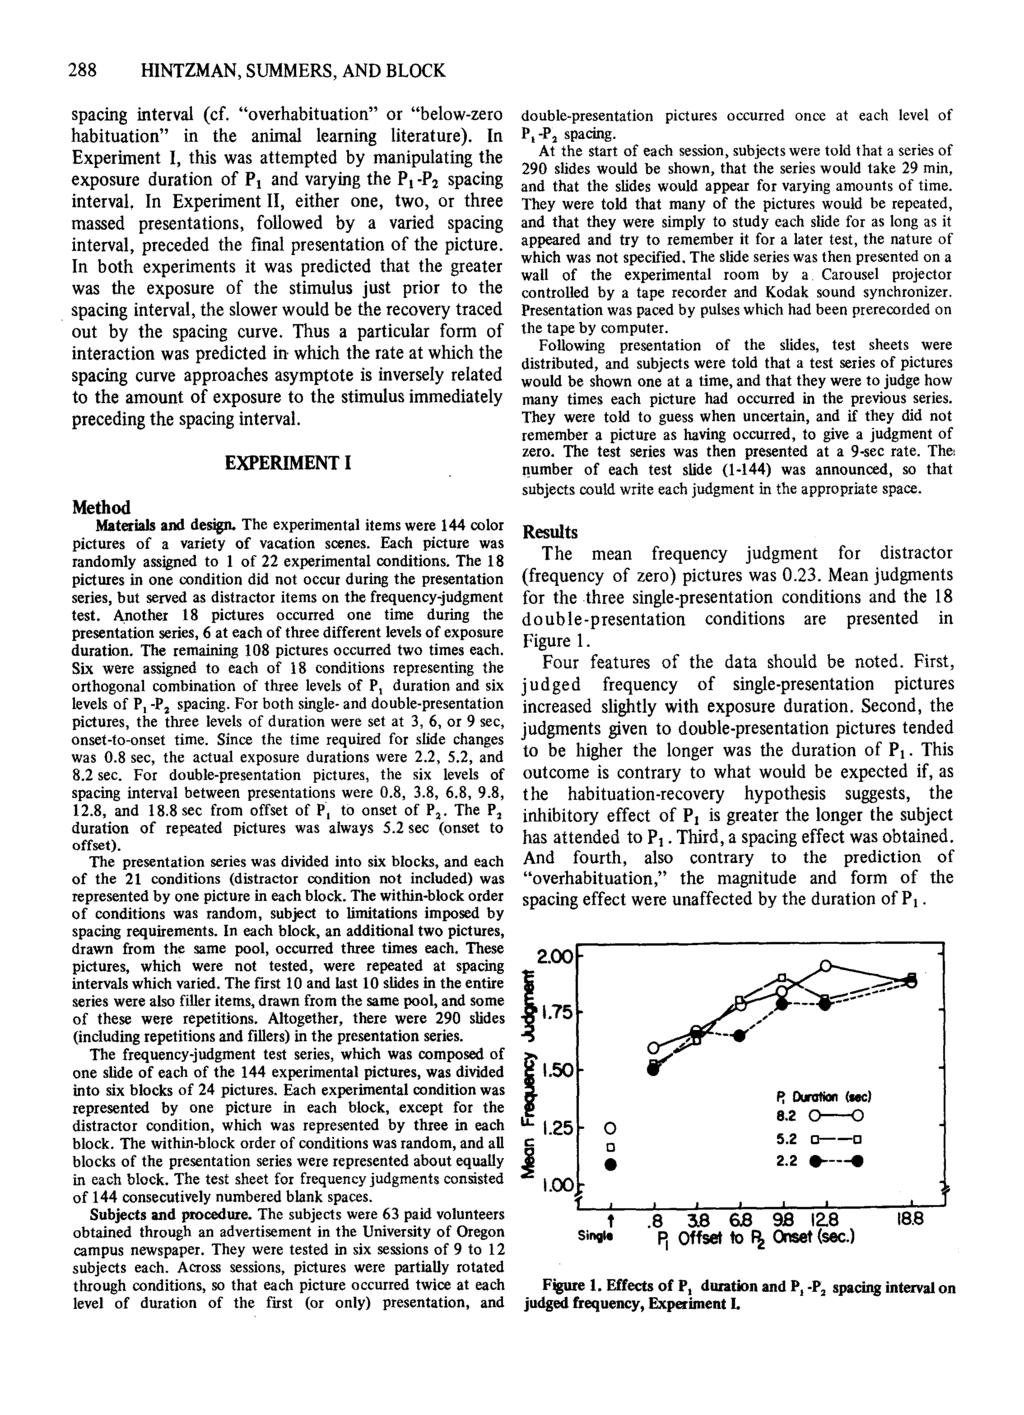 288 HNTZMAN, SUMMERS, AND BLOCK spaing interval (f. "overhabituation" or "below-zero habituation" in the animal learning literature).